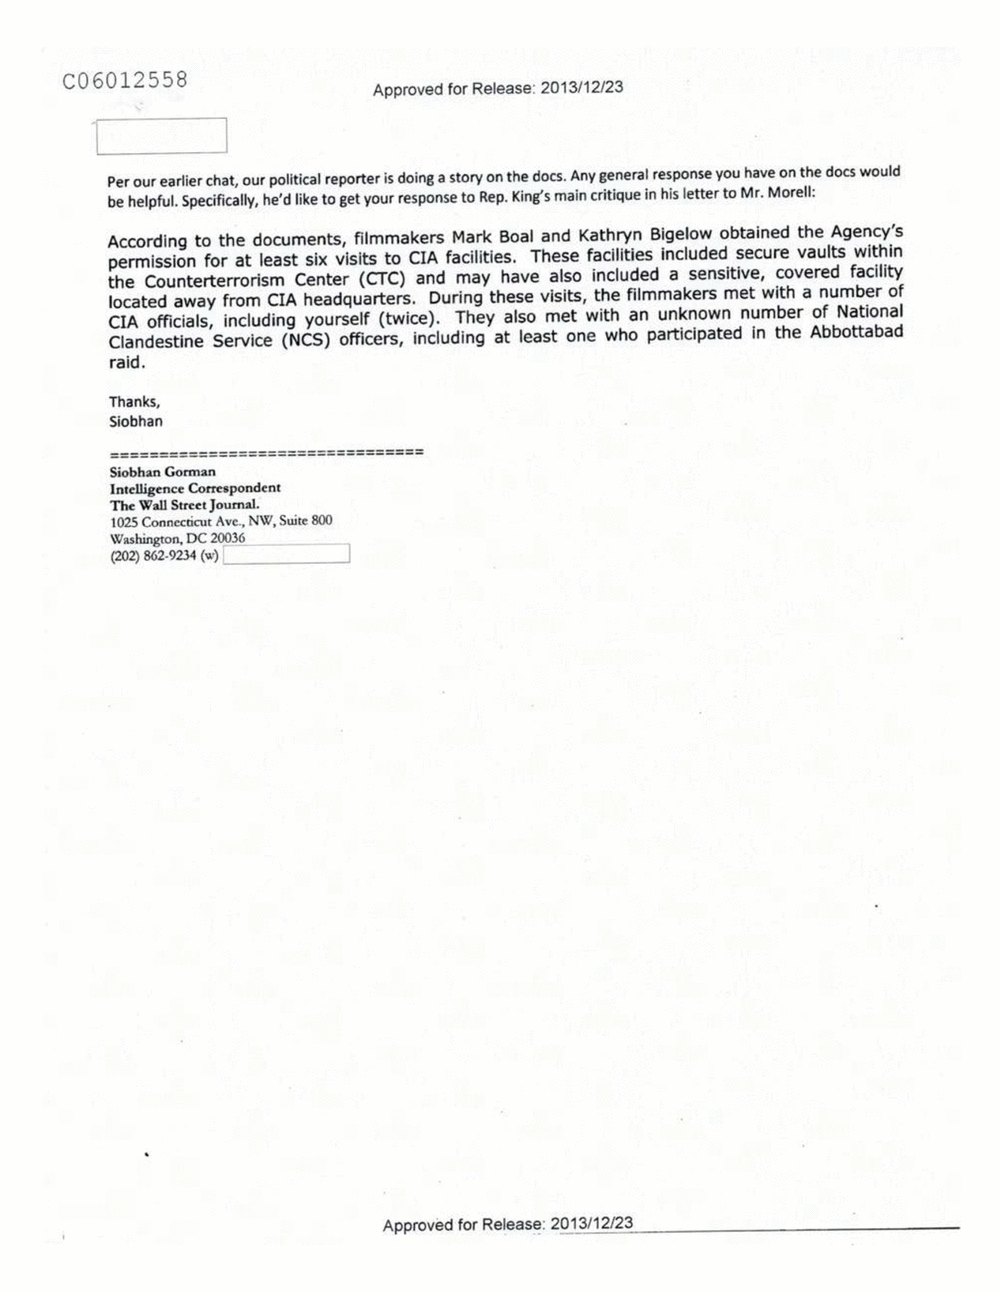 Page 161 from Email Correspondence Between Reporters and CIA Flacks